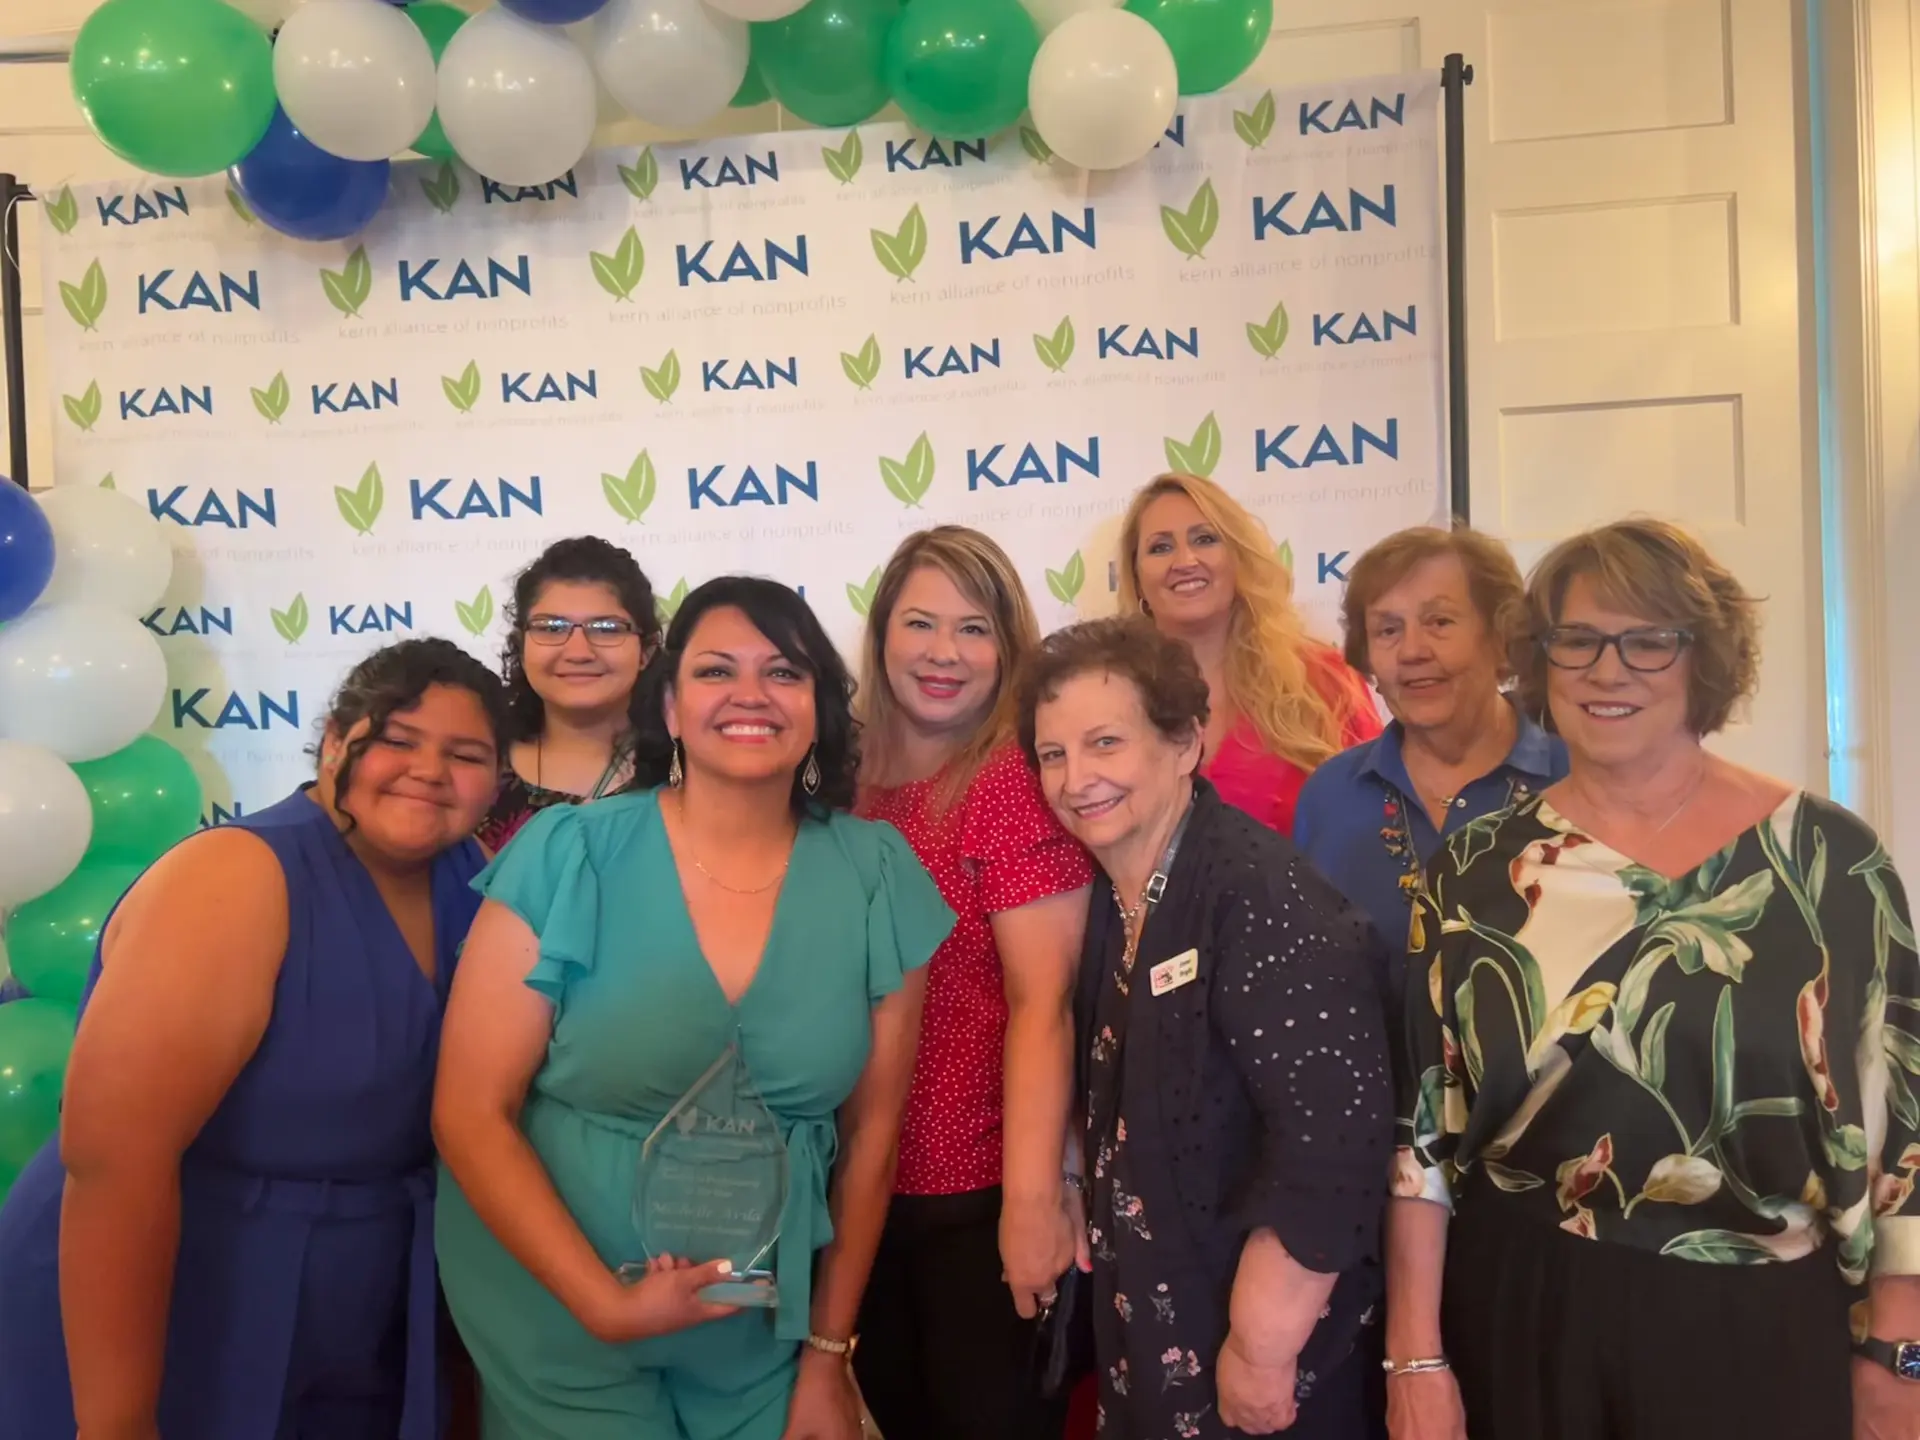 Michelle Avila named Nonprofit Profession of the Year at Kan Awards